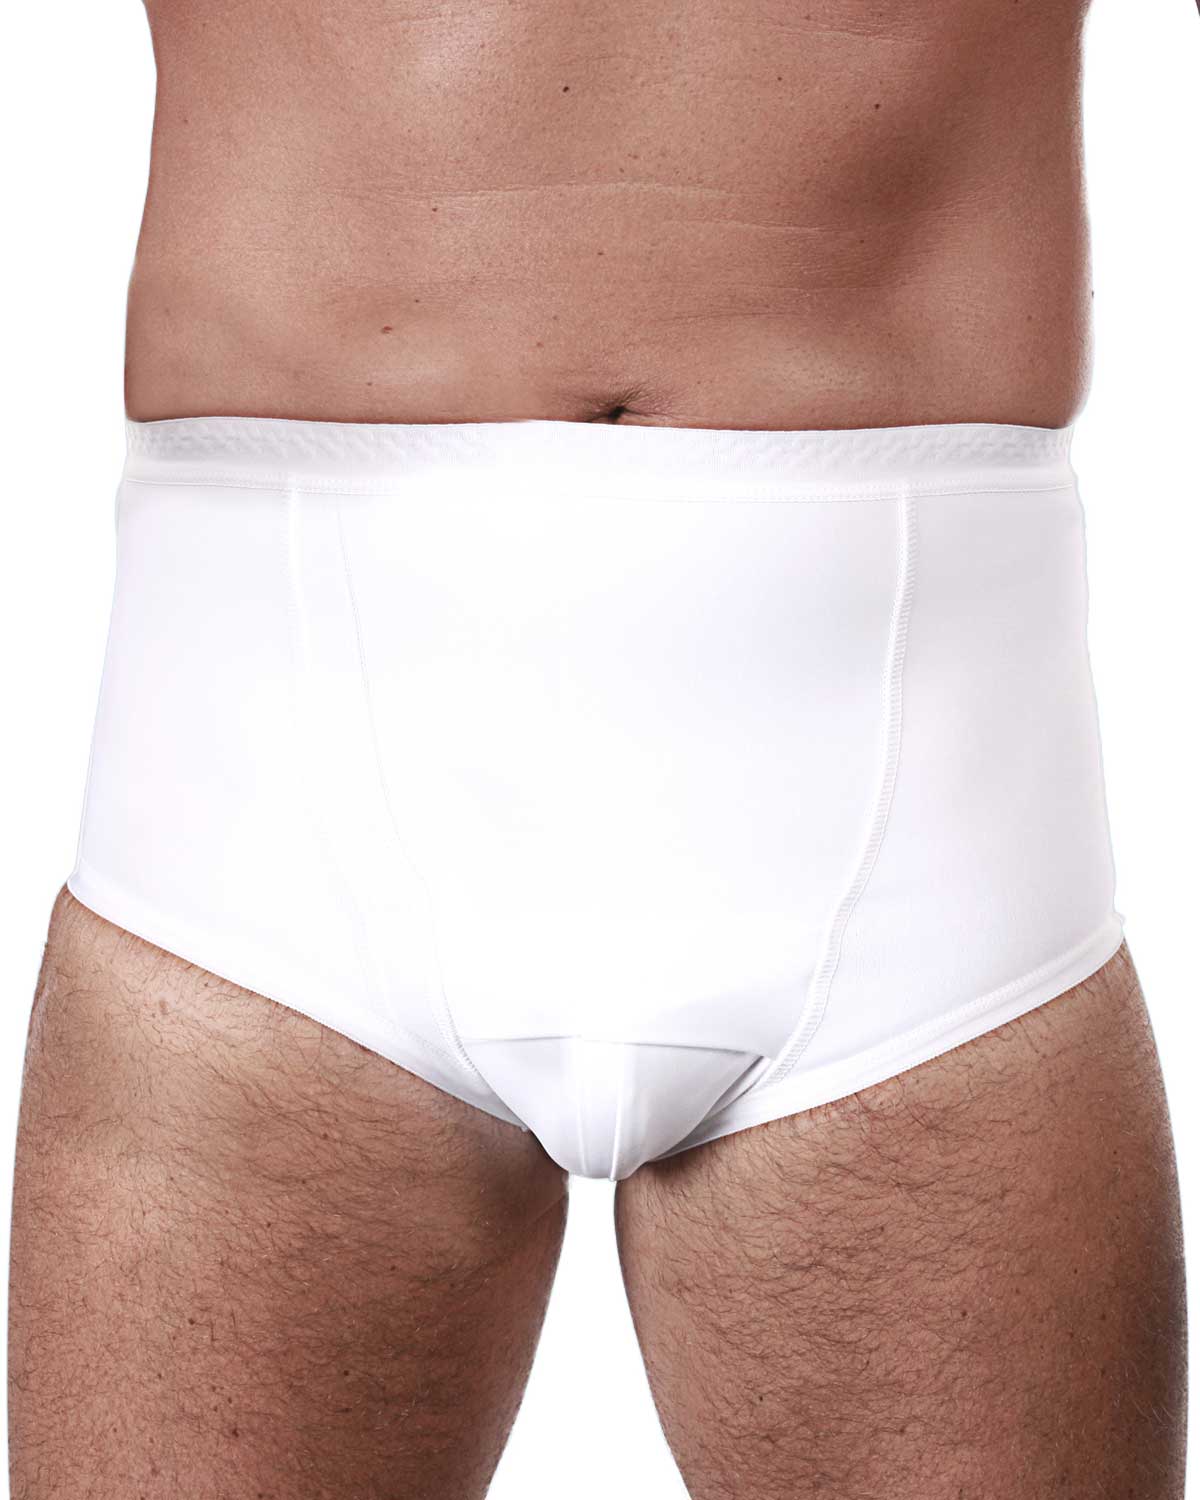 Briefs -Disposable - Incontinence - Incontinence & Ostomy Products